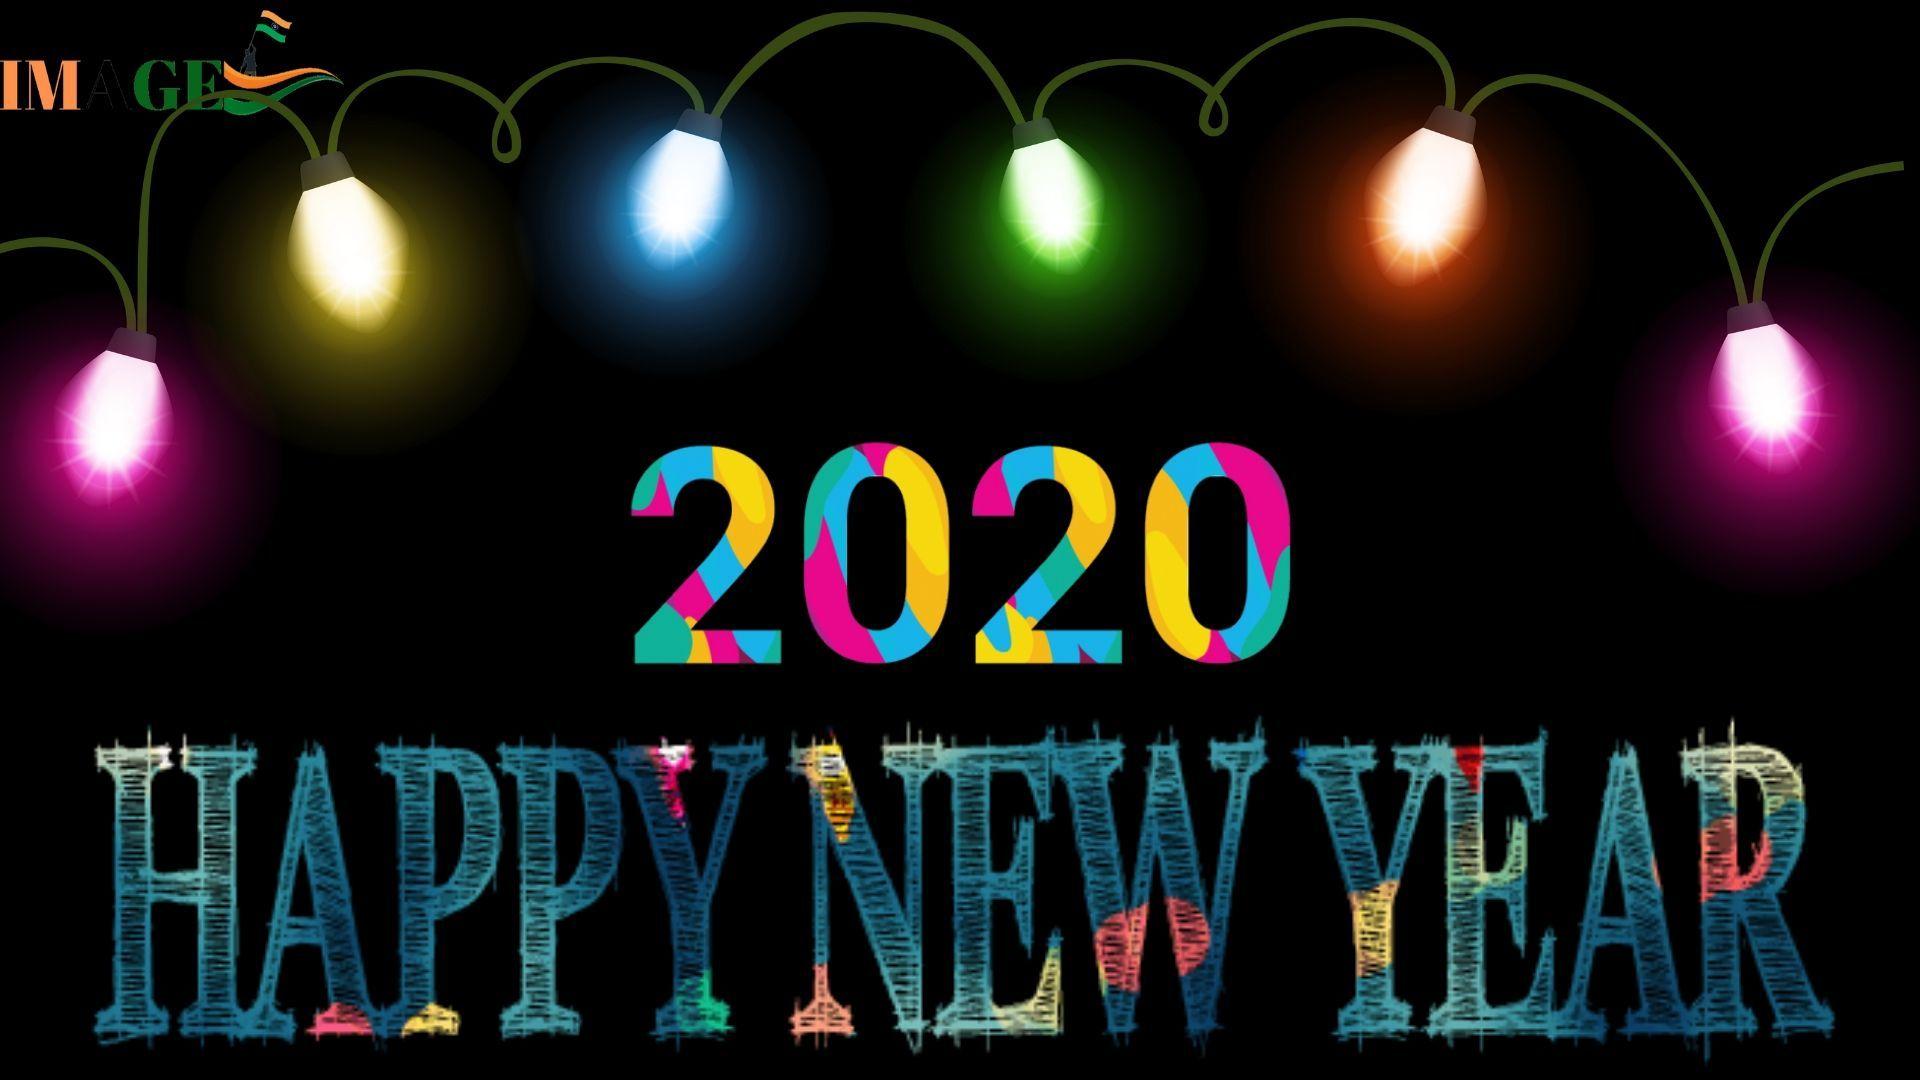 Download Happy New Year 2020 Wishes Best Image Wallpaper